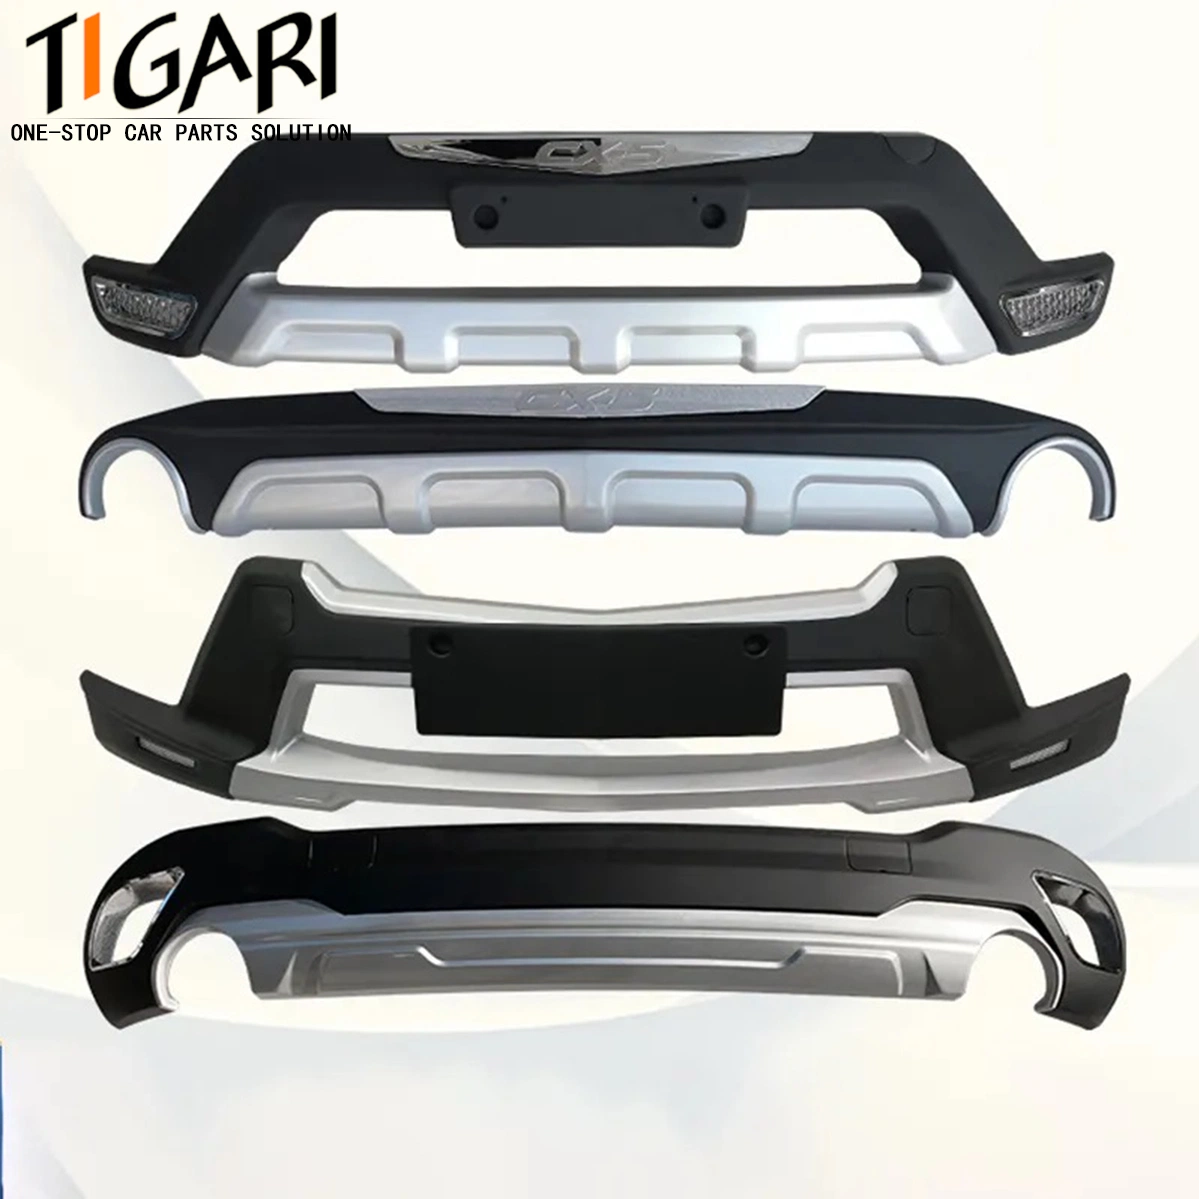 Stable and Reliable Motorcycle Parts Bumper Guard for Mazada Cx-5